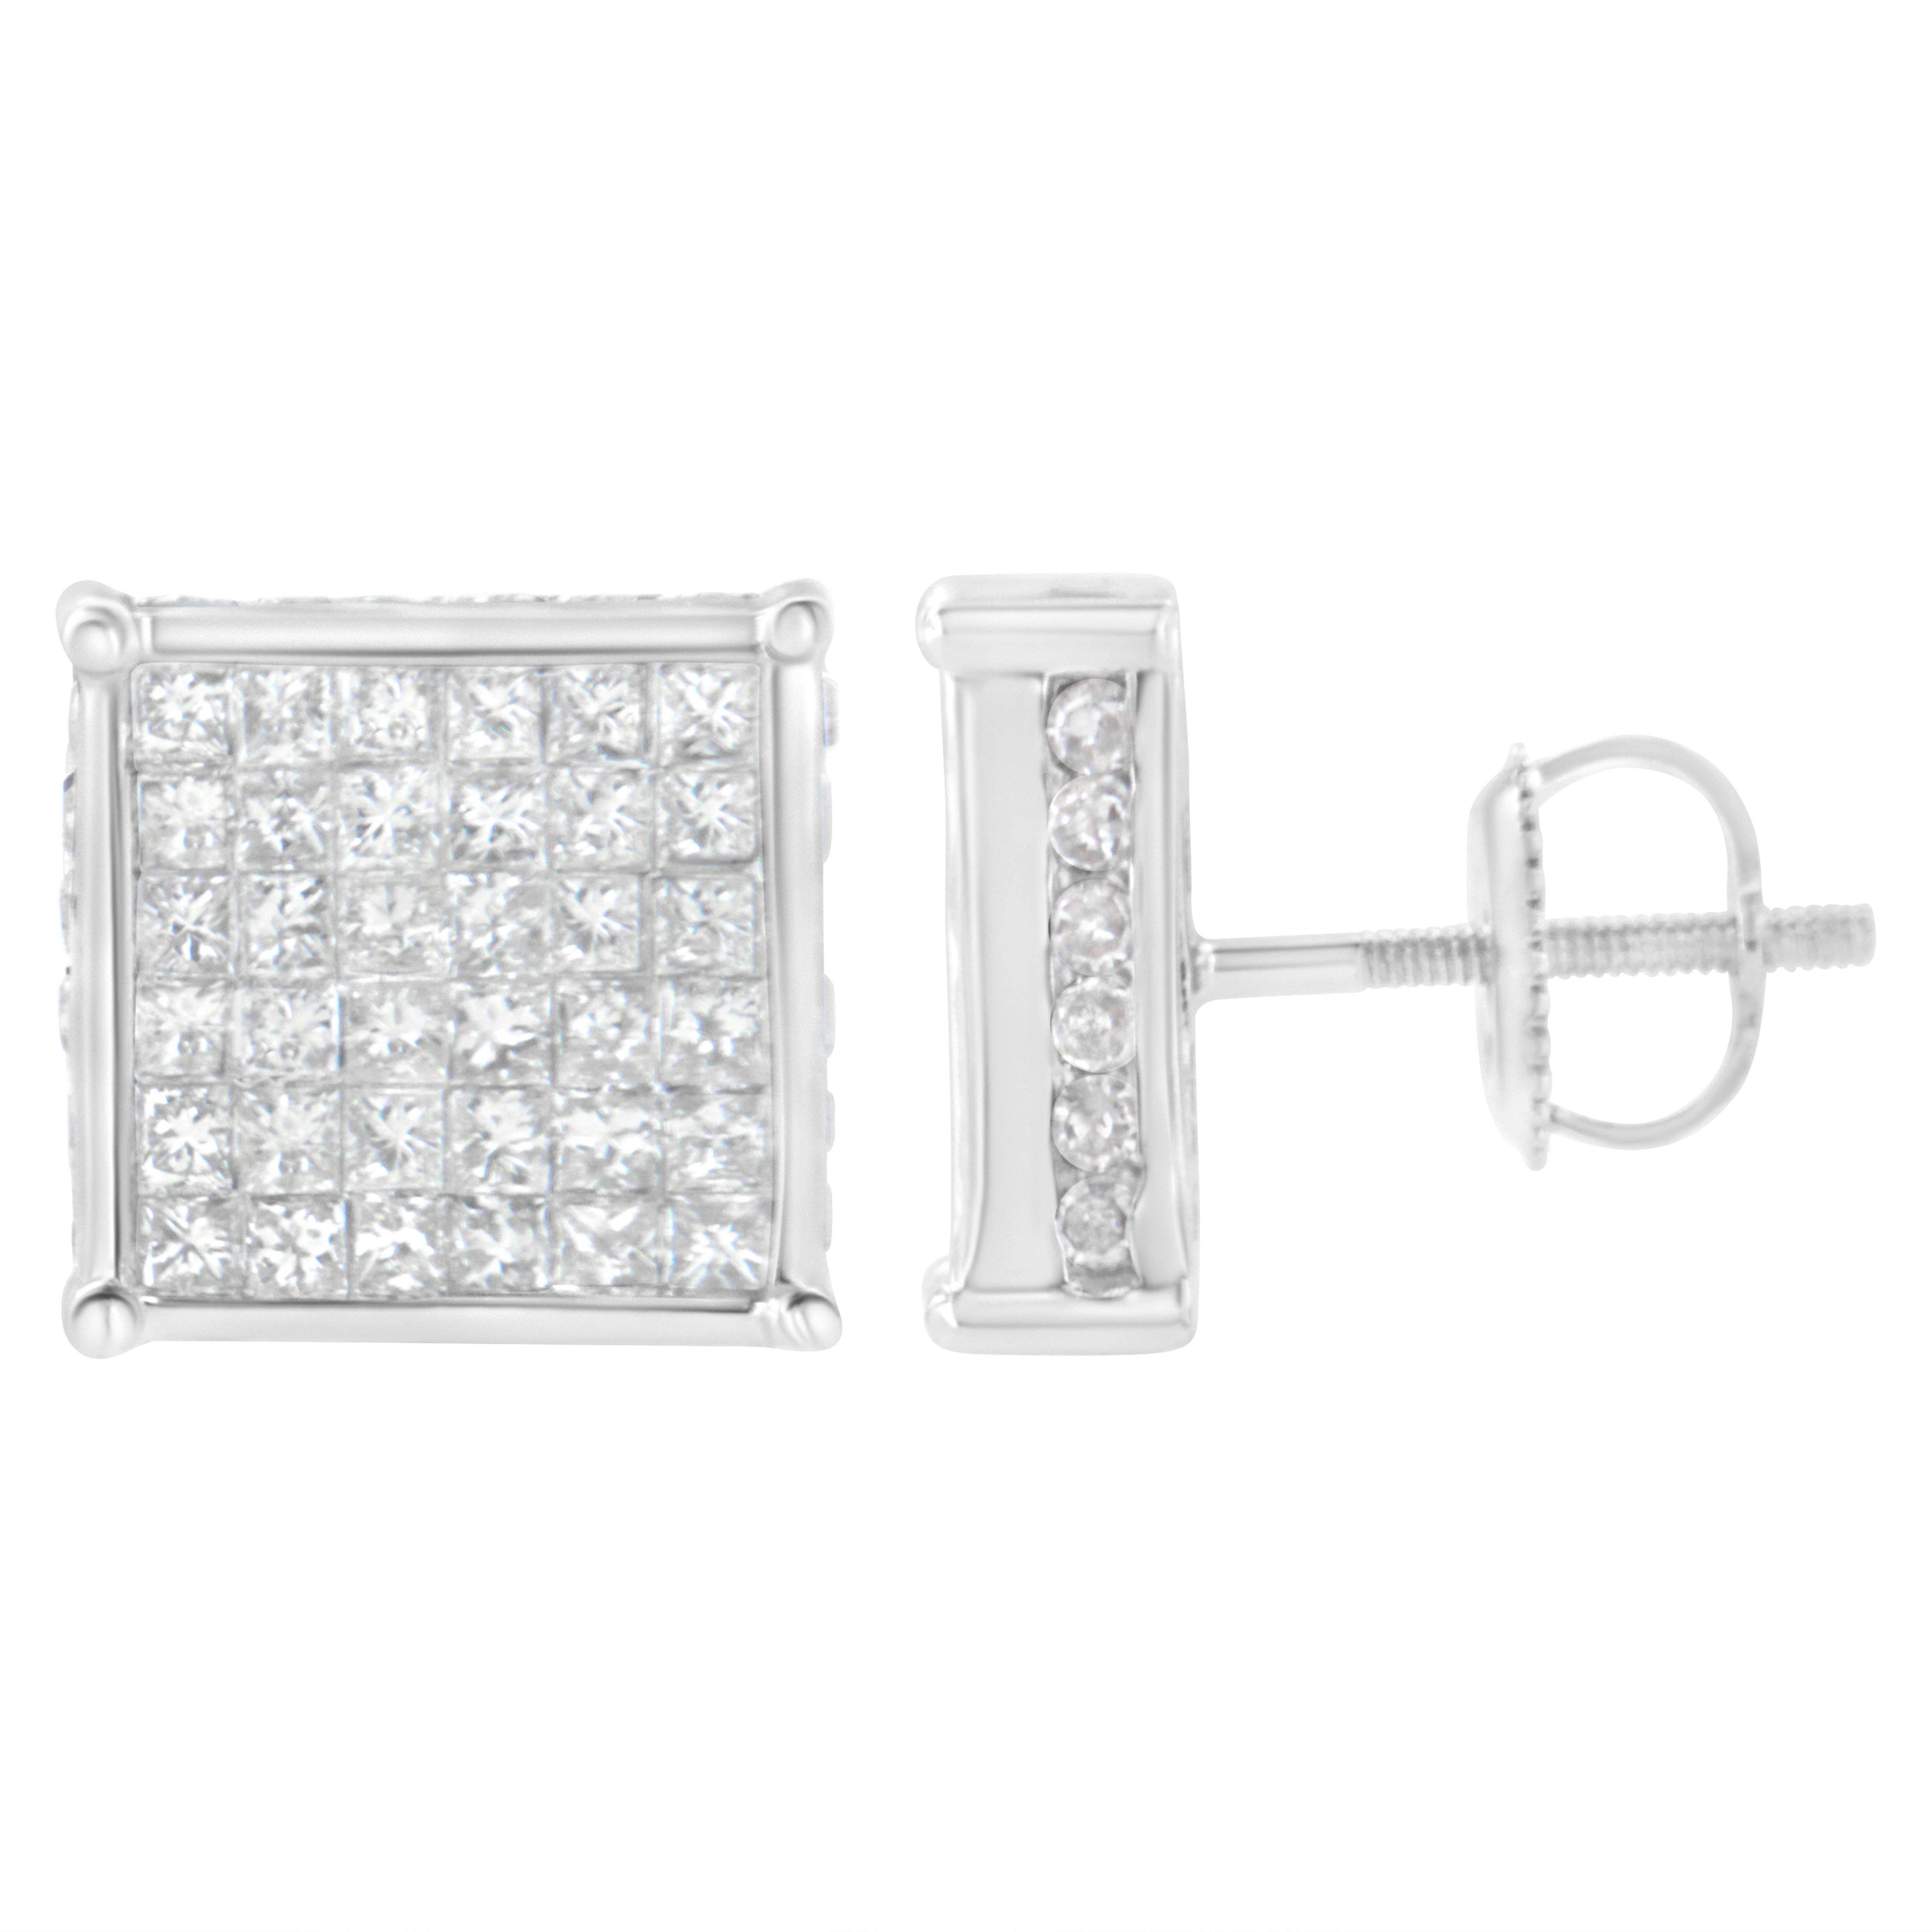 Timeless and tasteful, these fancy-shape diamond stud earrings complement one's classic sense of style. Crafted in cool 10K white gold, each square composite earring shimmers with a six-by-six grid of sparkling princess-cut diamonds. These earrings